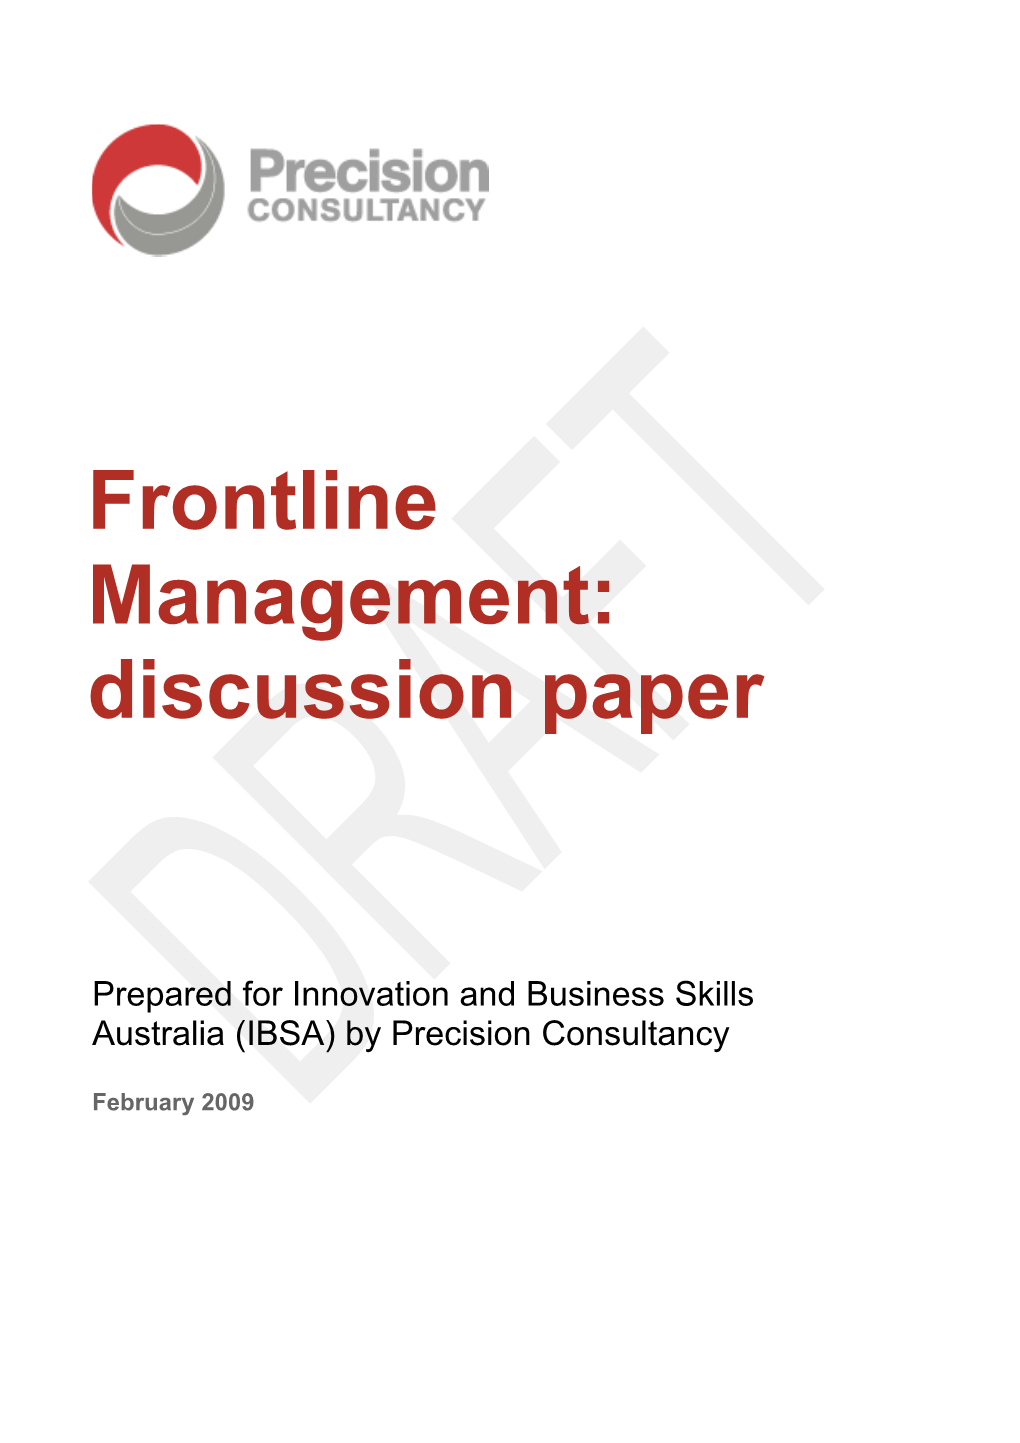 Review of Key Reports and Documentation Relating to Management, Leadership and Innovation